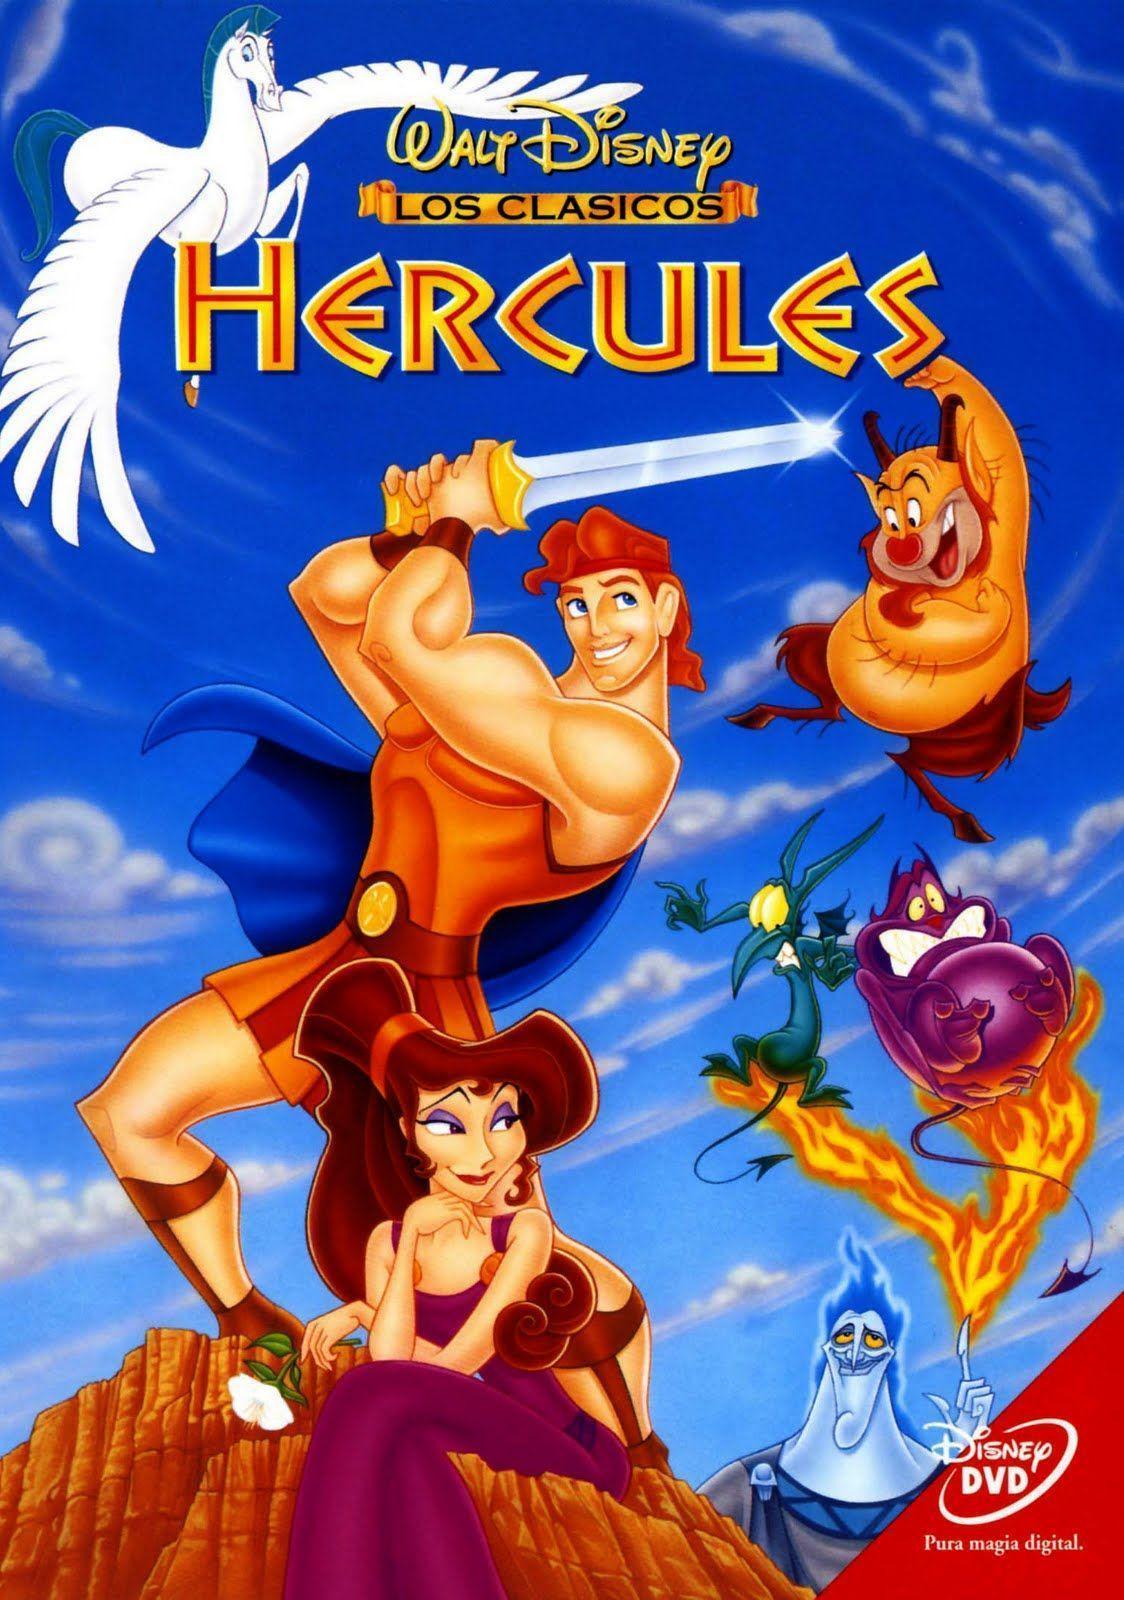 Awesome Hercules Backgrounds | Hercules Wallpapers